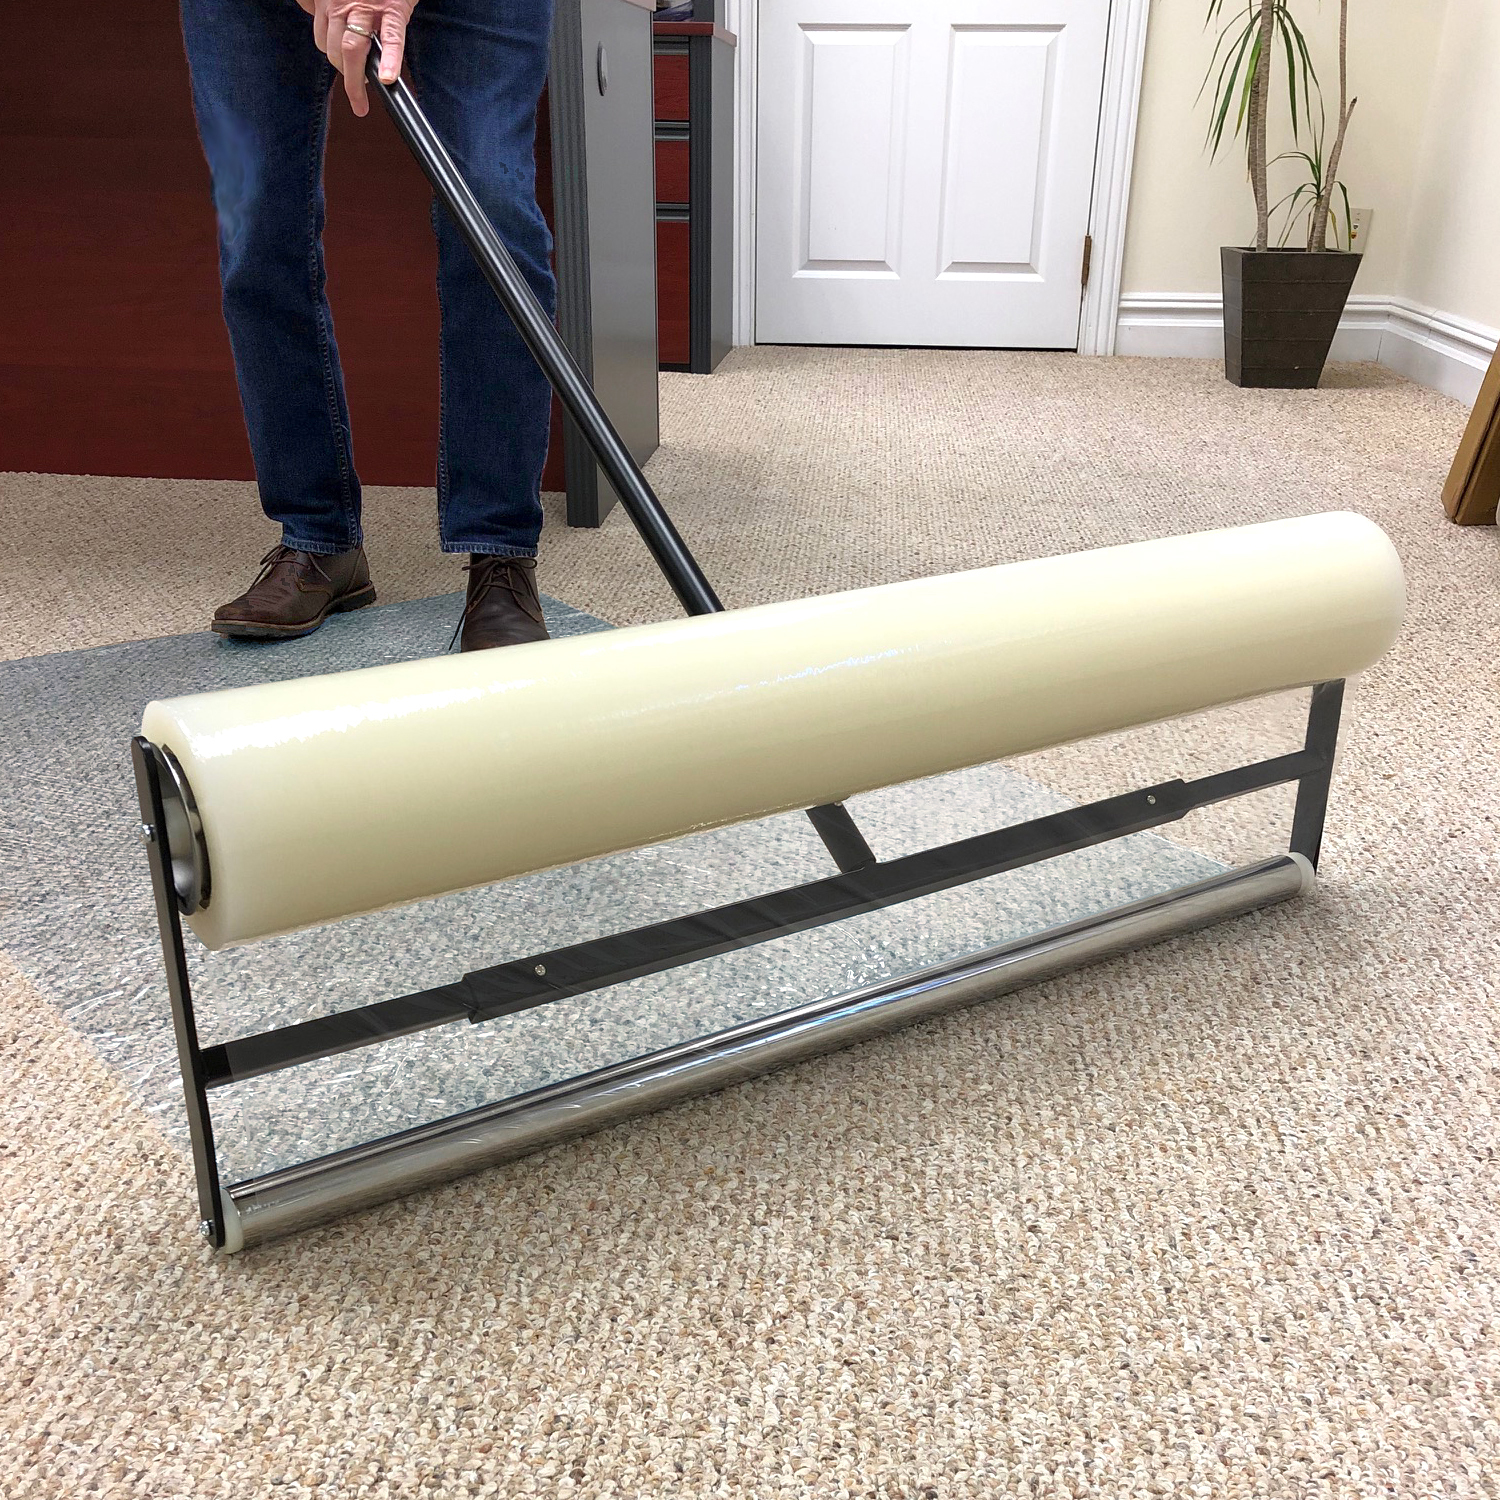 Carpet Protection Film, Length 200 Feet, Size 36 Inch